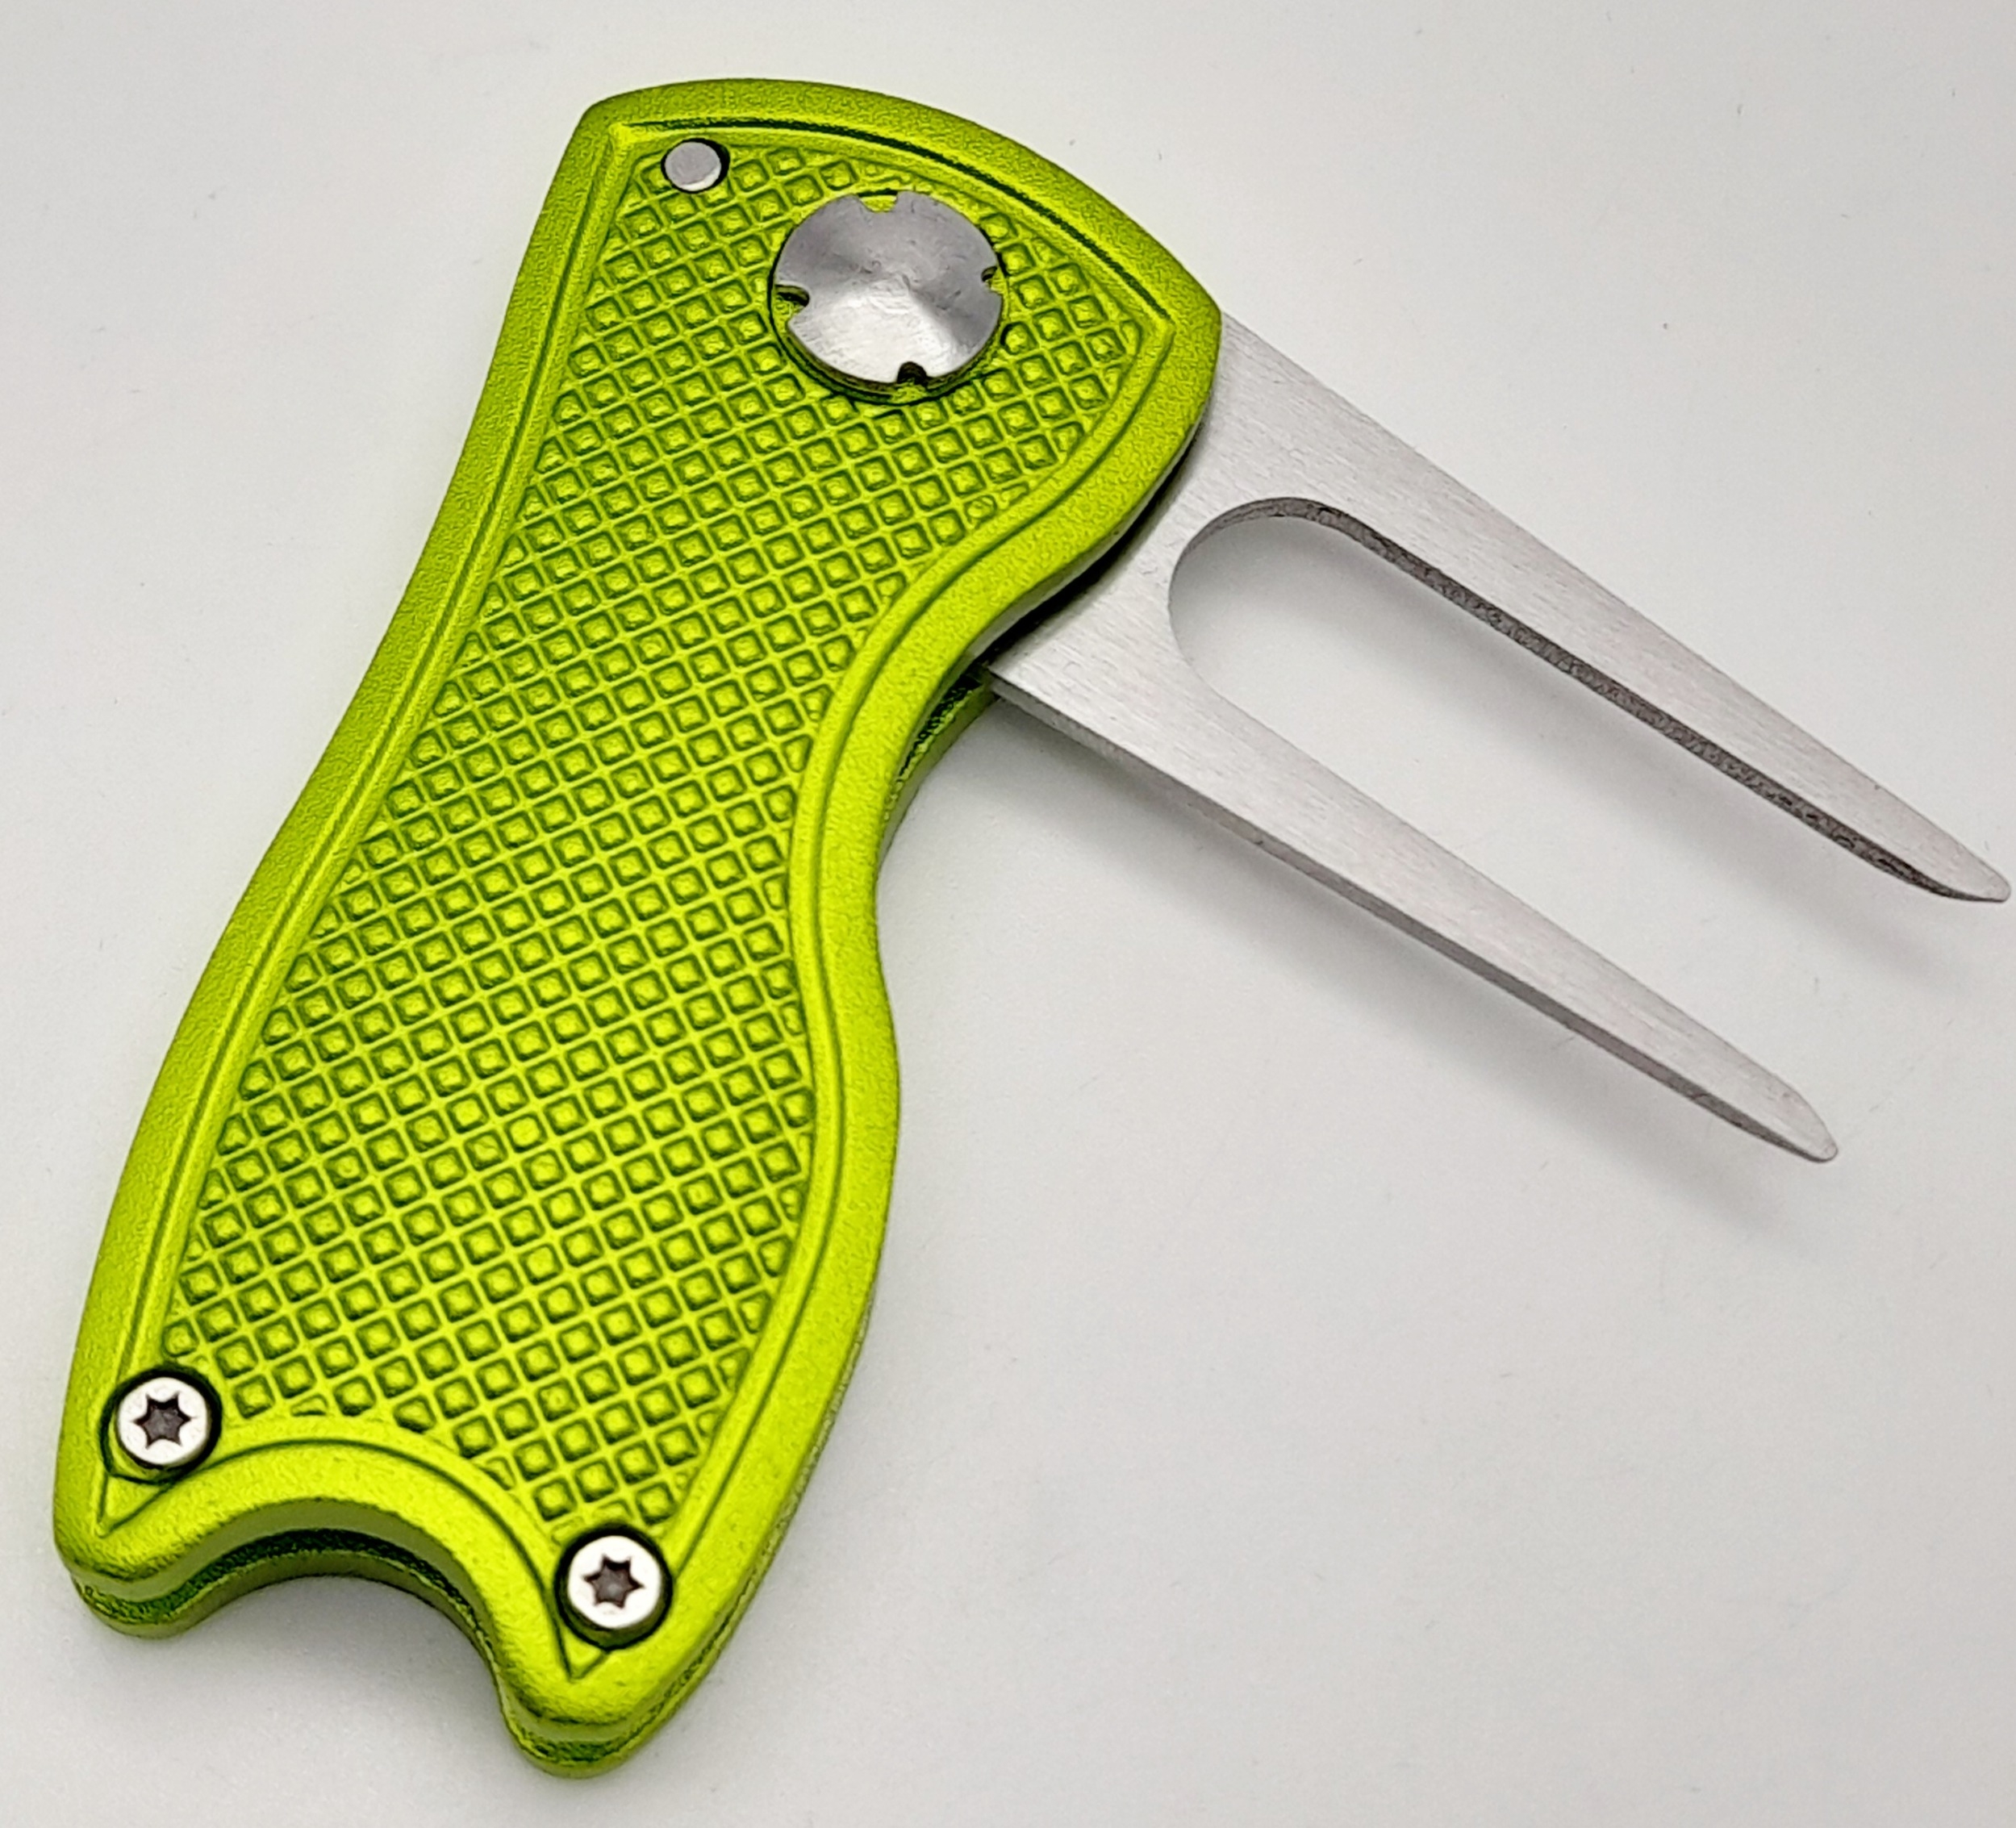 A Rolex Branded Retractable 'Flick' Golf Putting Divot Repair Tool. Removable magnetic ball marker - - Image 3 of 4